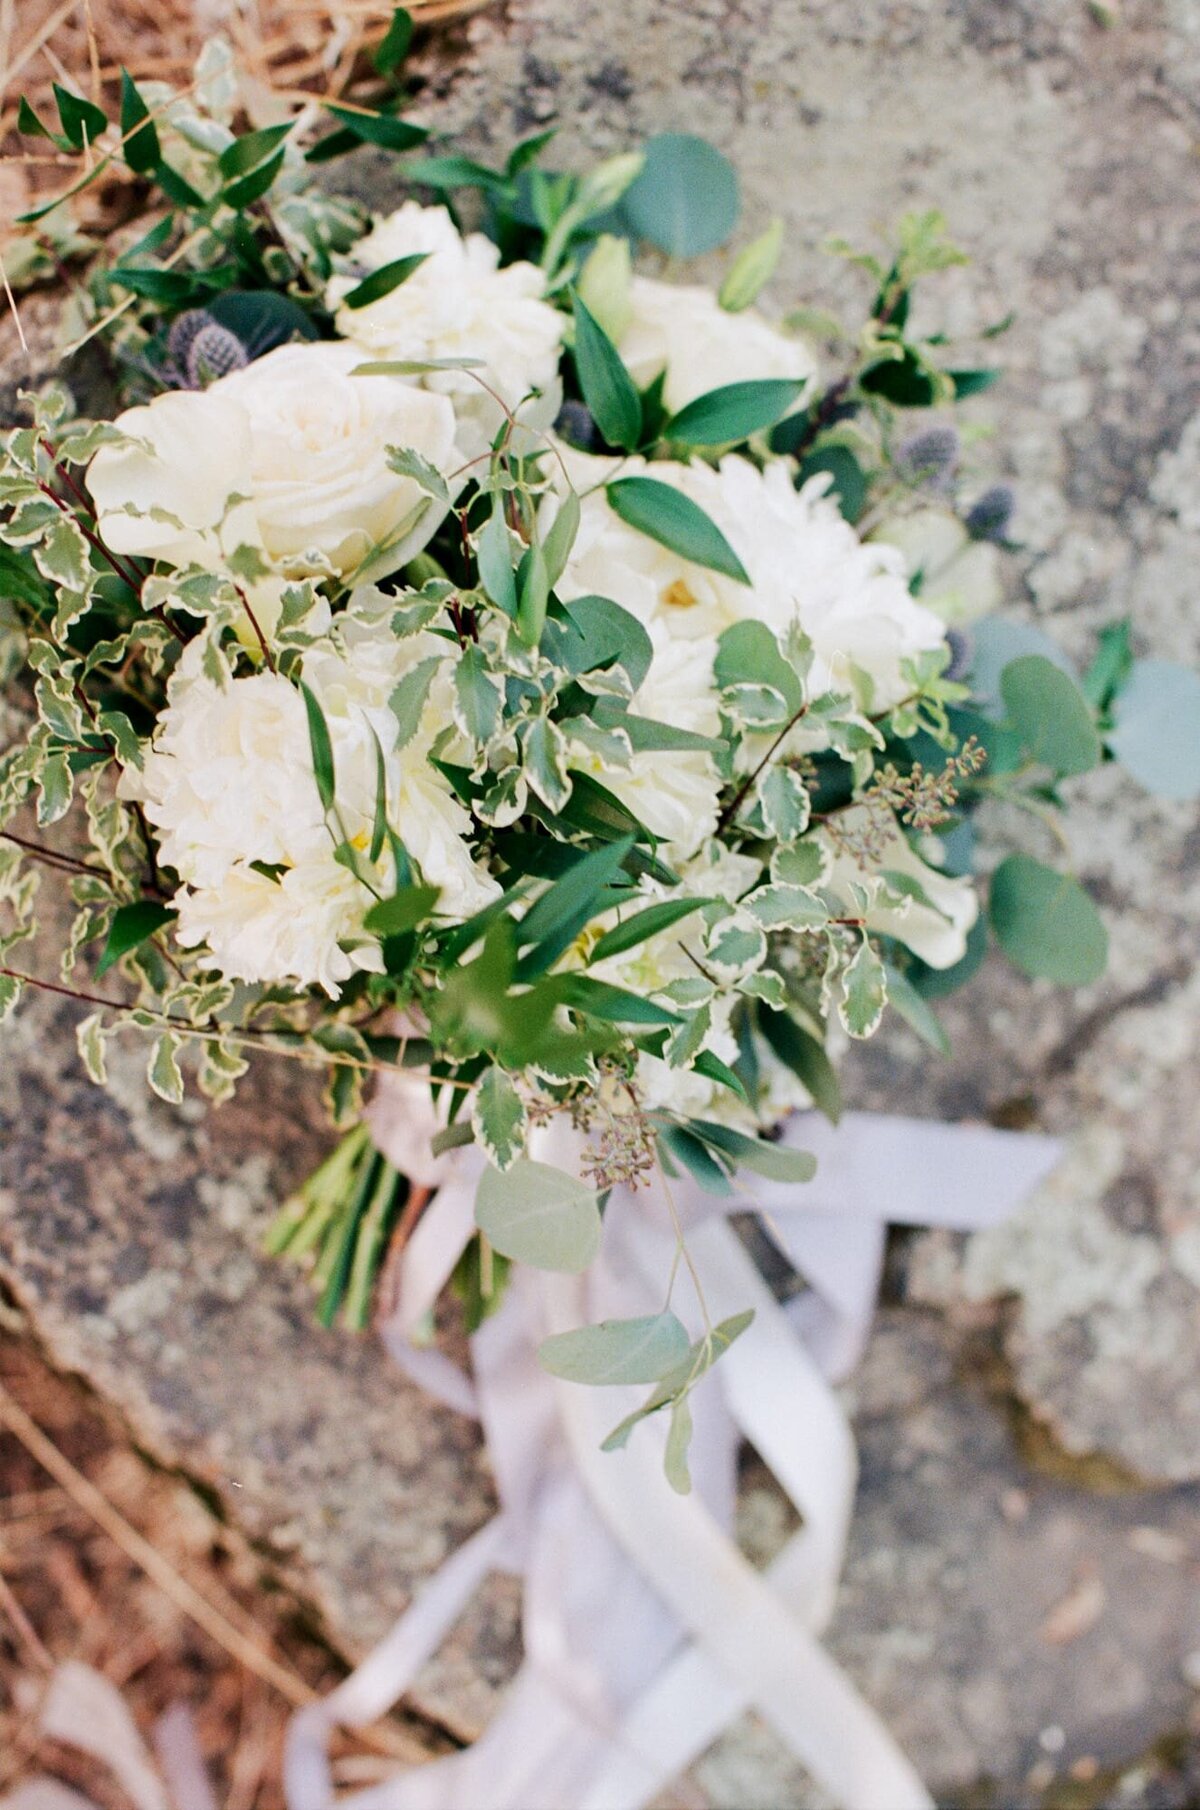 White flowers with leaves and branches tied neatly into a bouquet with silky white ribbons.